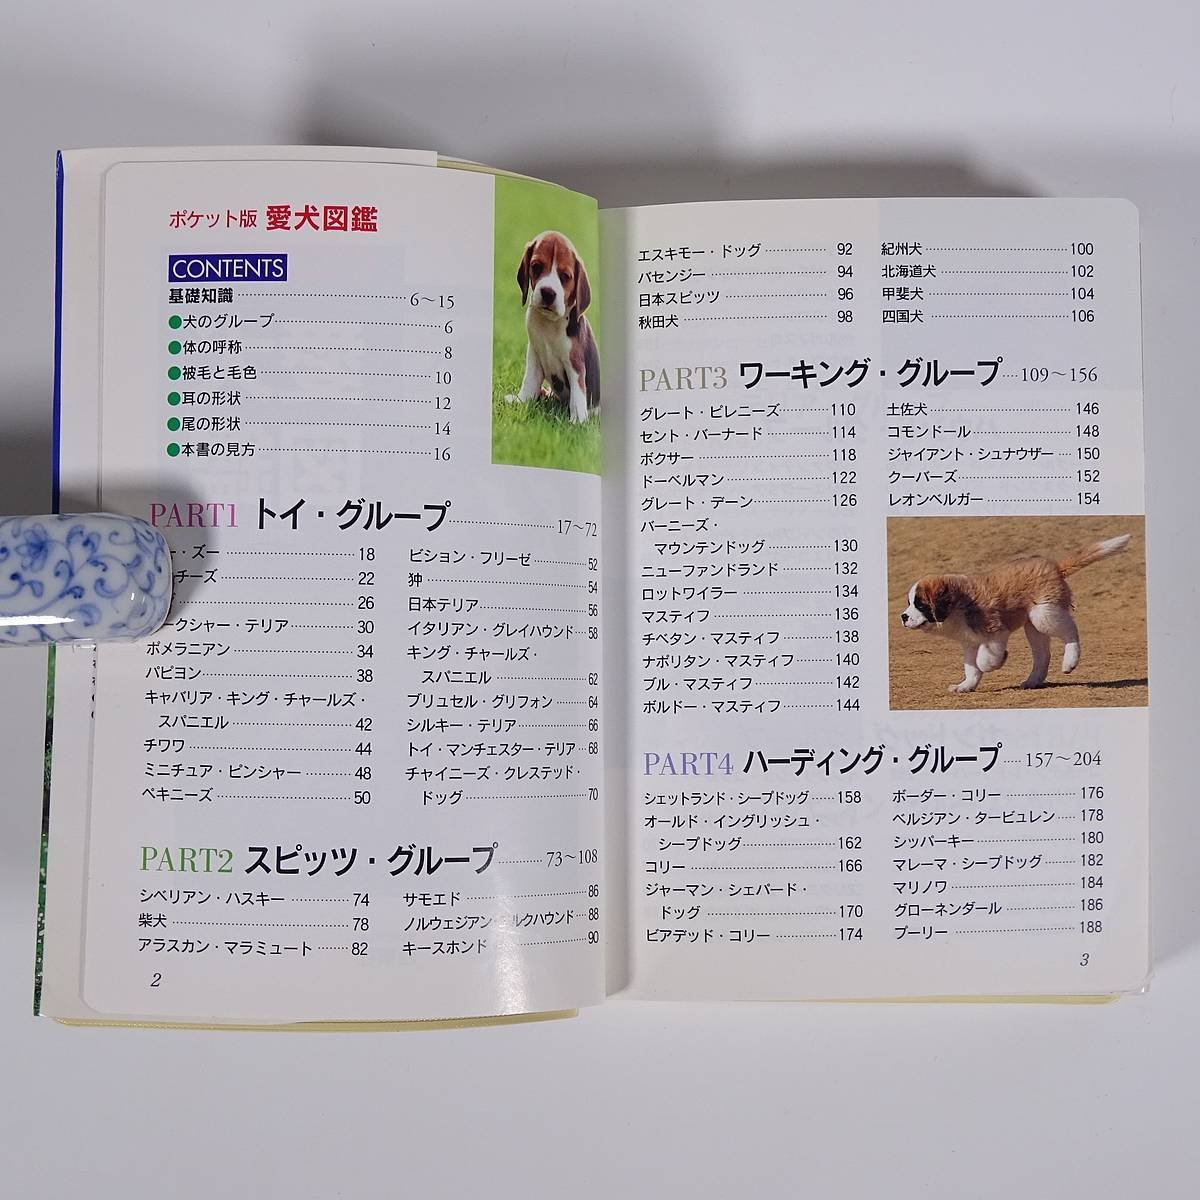  pocket version love dog illustrated reference book west .. west higashi company 1998 library size map version llustrated book pet dog dog dog 